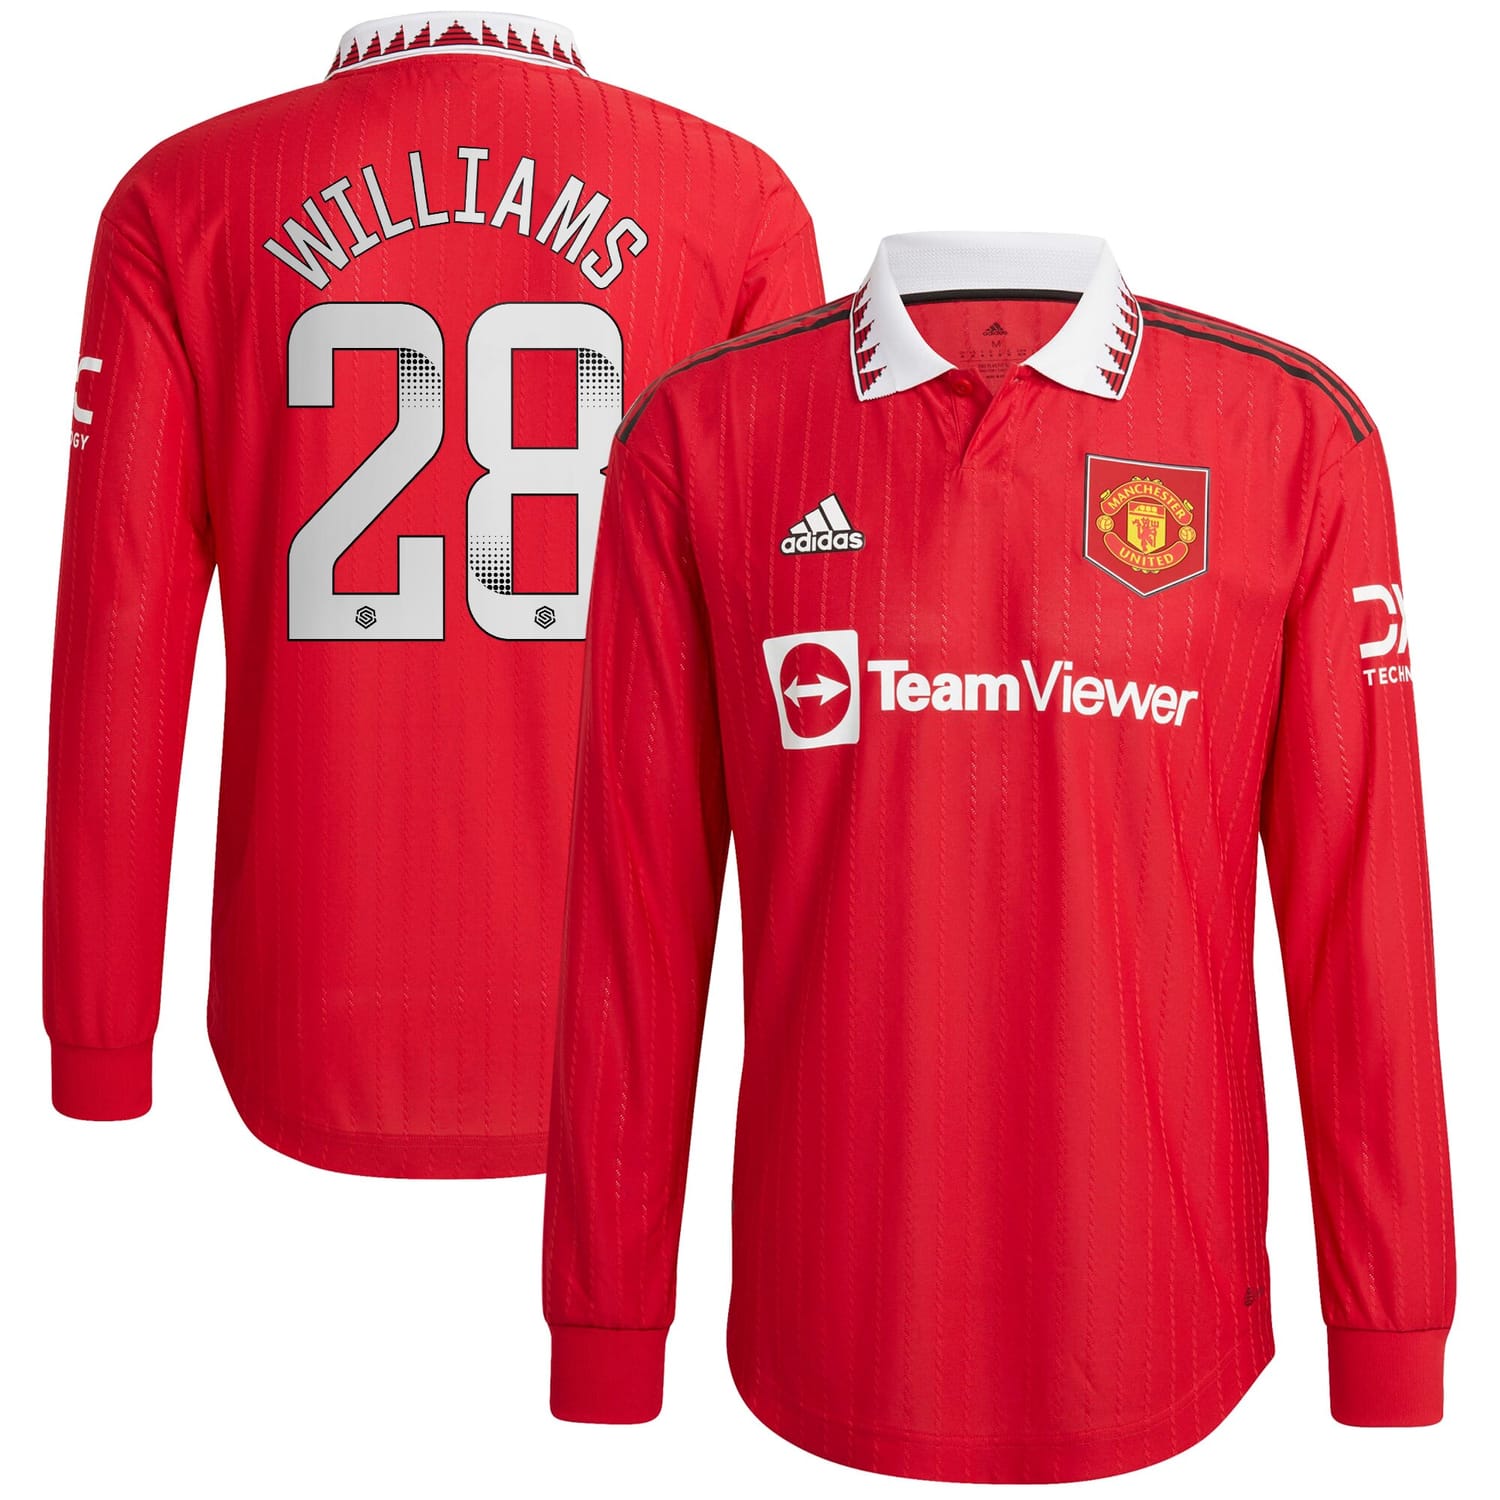 Premier League Manchester United Home WSL Authentic Jersey Shirt Long Sleeve 2022-23 player Rachel Williams 28 printing for Men